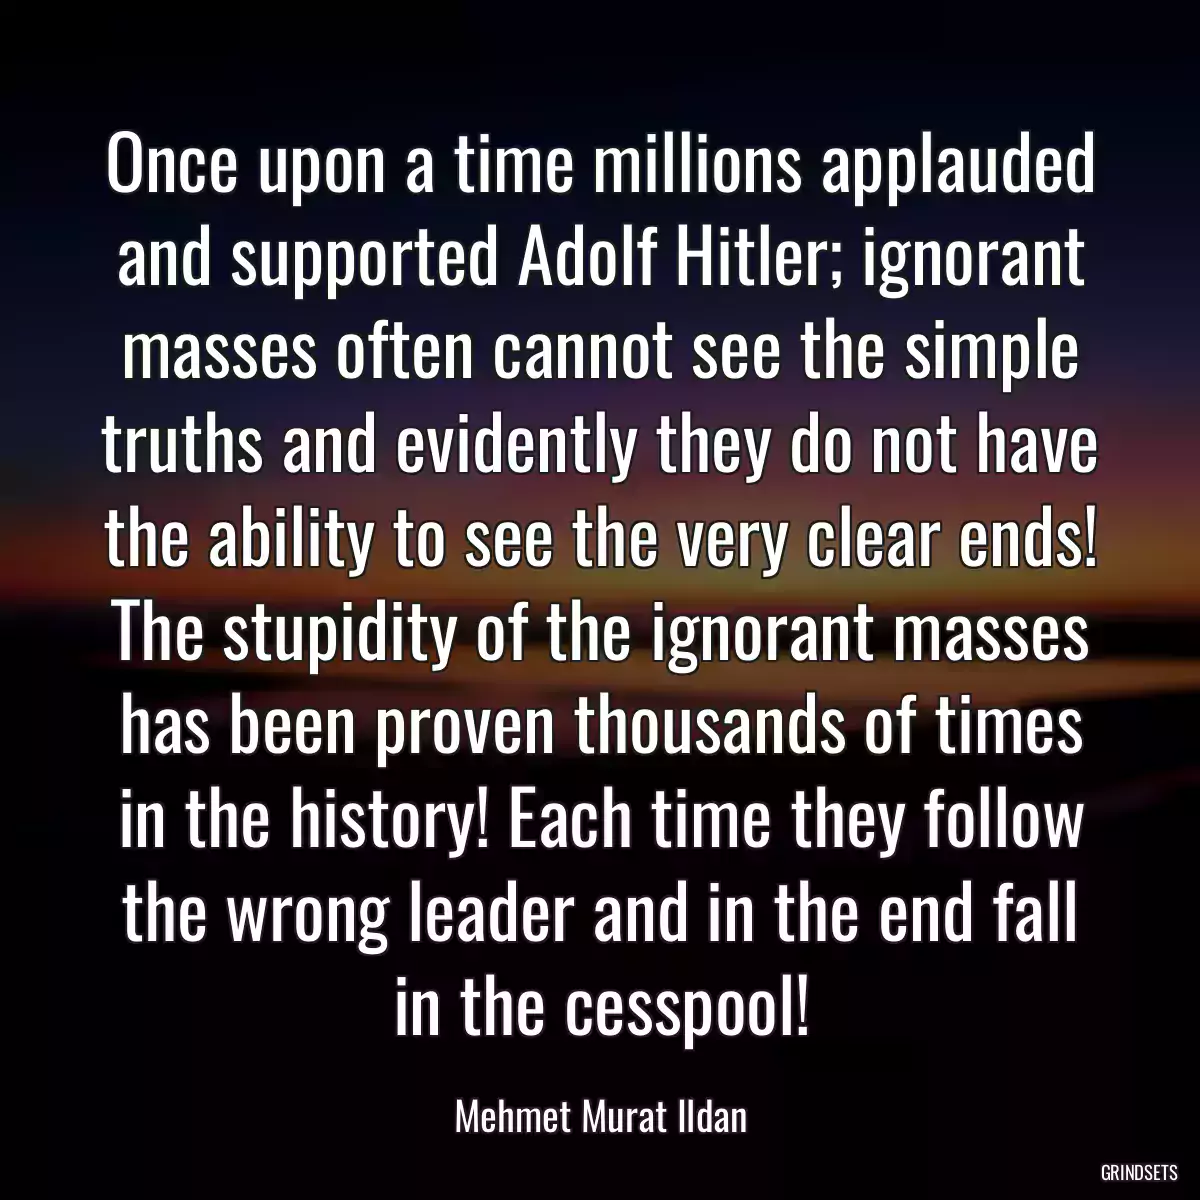 Once upon a time millions applauded and supported Adolf Hitler; ignorant masses often cannot see the simple truths and evidently they do not have the ability to see the very clear ends! The stupidity of the ignorant masses has been proven thousands of times in the history! Each time they follow the wrong leader and in the end fall in the cesspool!